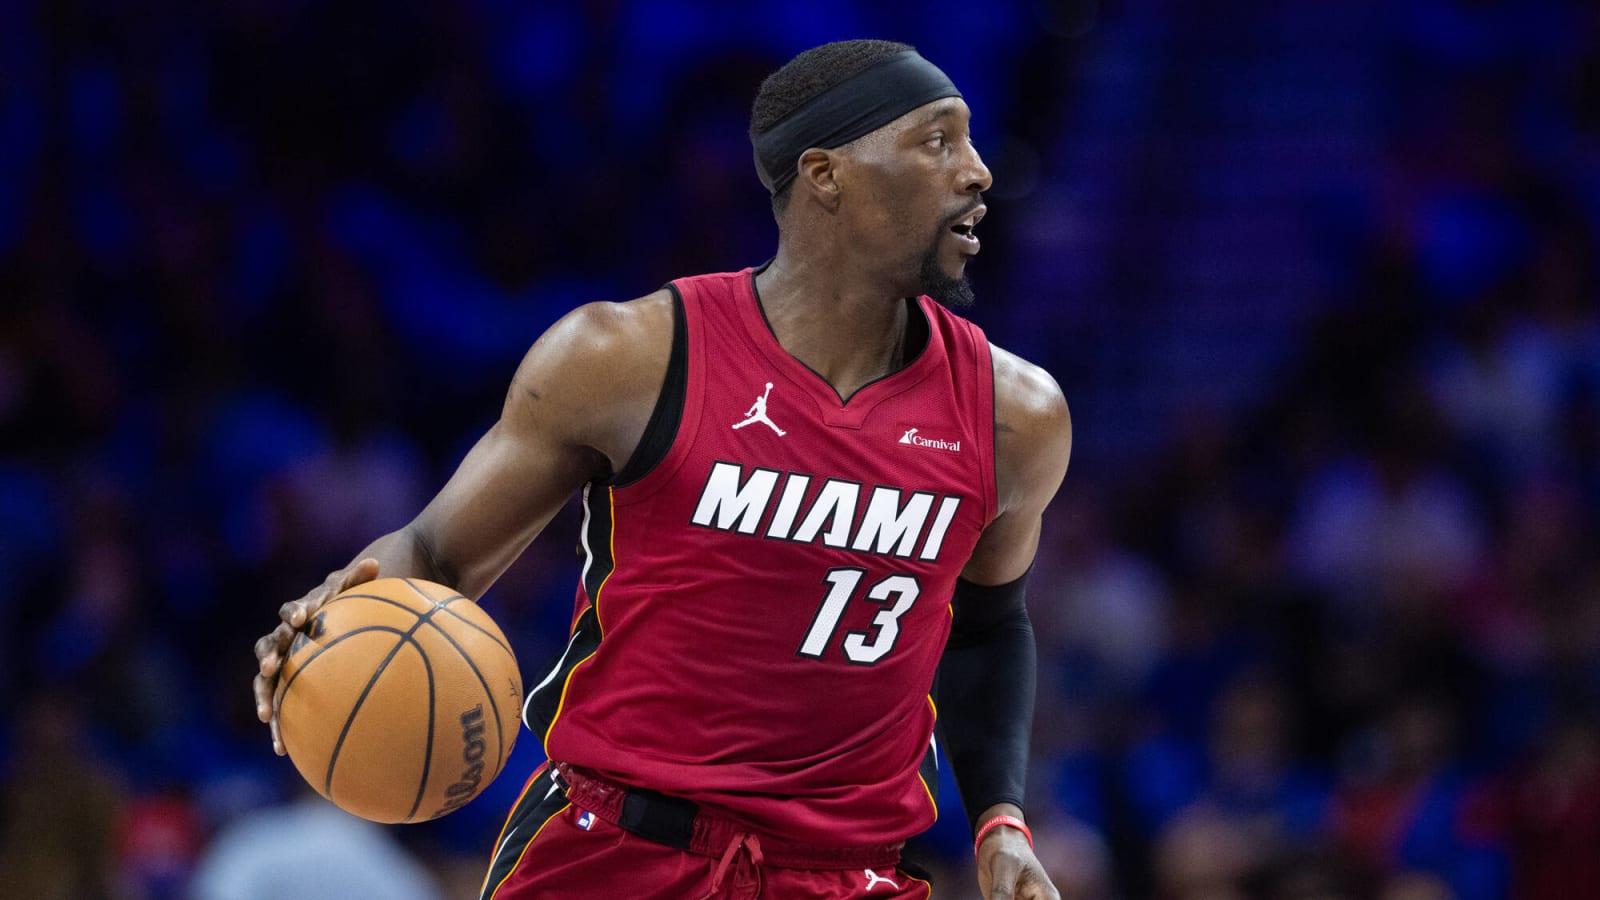 Miami Heat’s Bam Adebayo Fires Stern Warning Against the Boston Celtics Ahead of the 1st Round: ‘It’s Going to be a Dogfight’